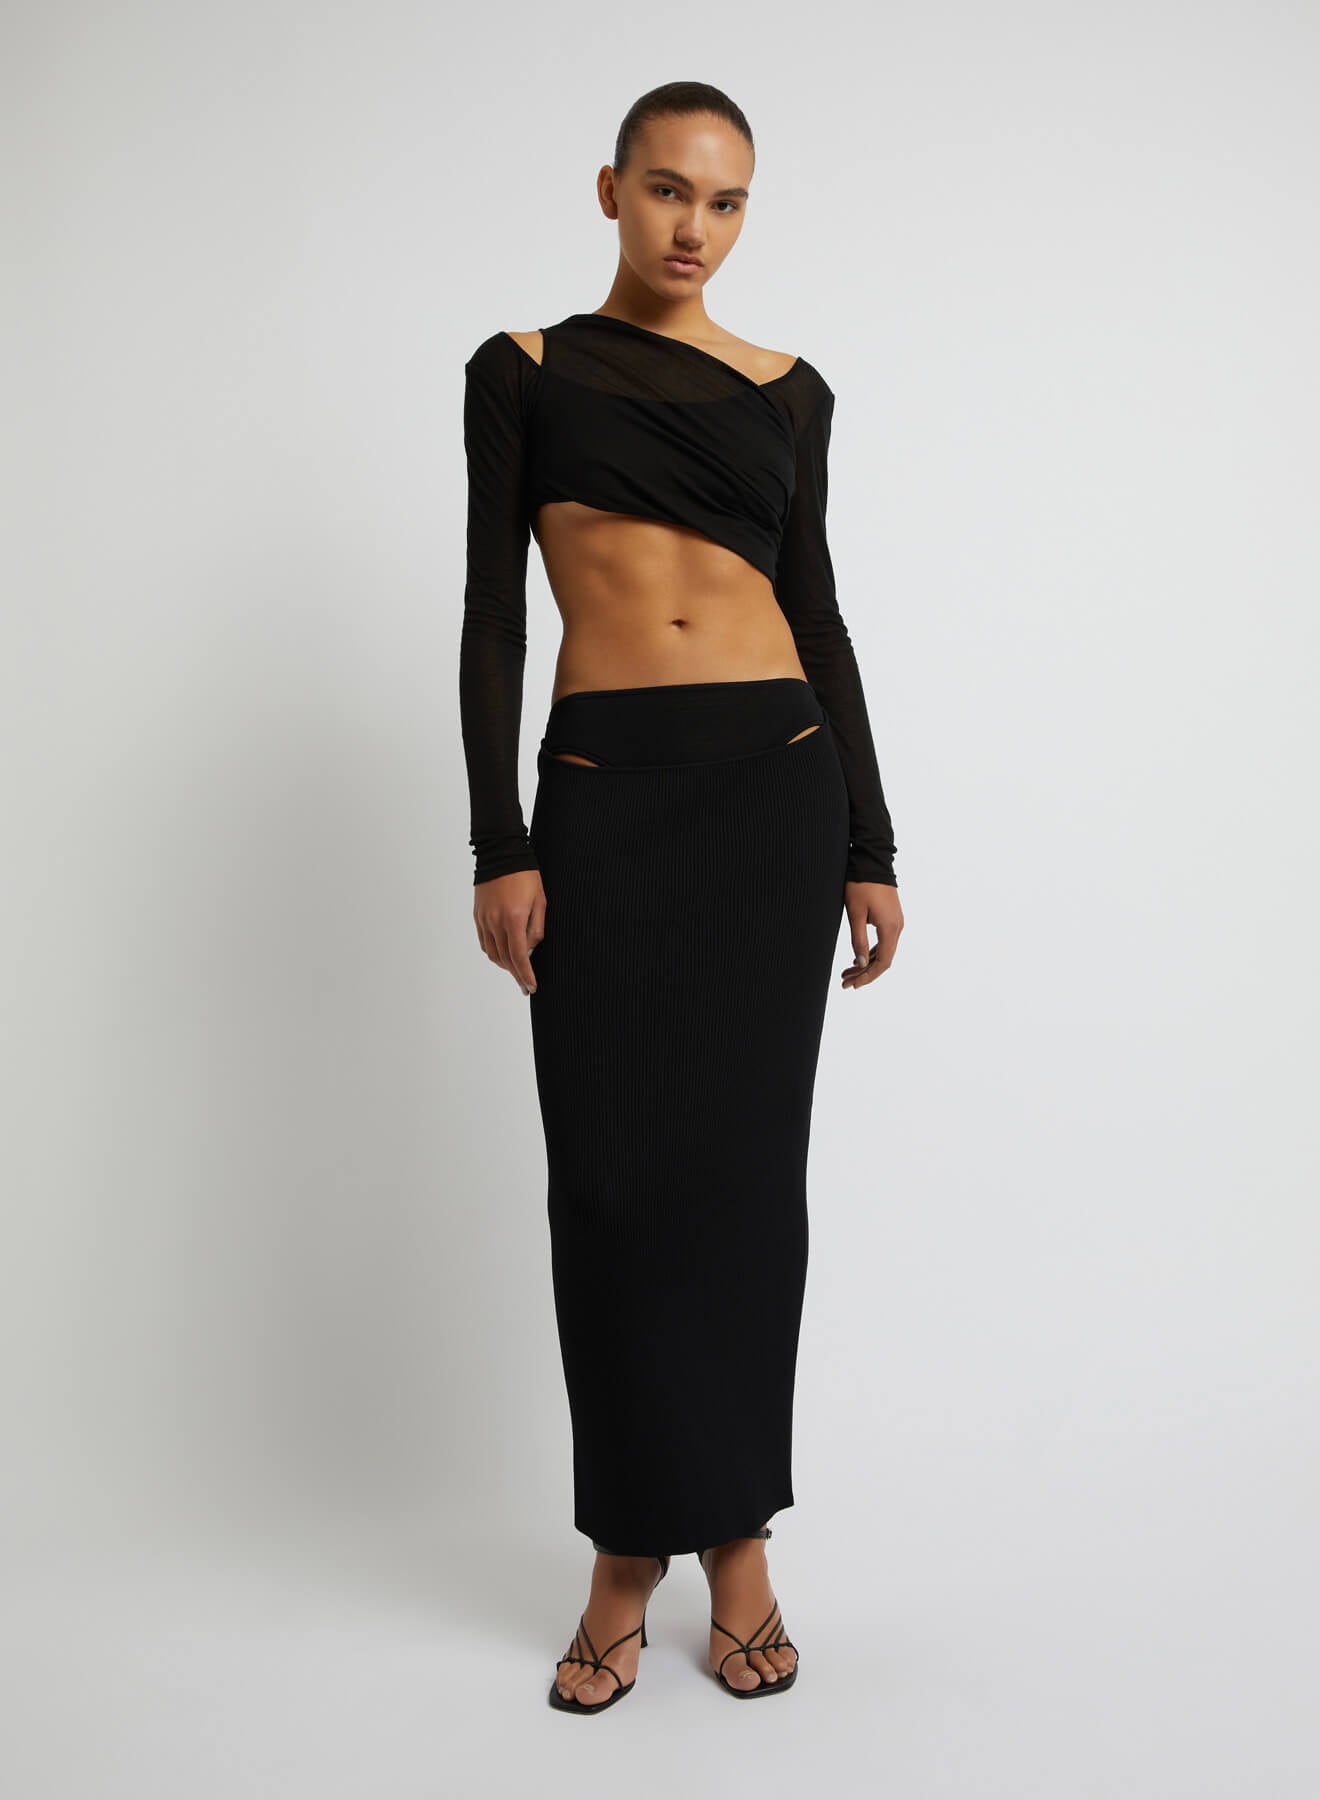 Christopher Esber Folded Crop Long Sleeve Top in Black available at TNT The New Trend Australia.